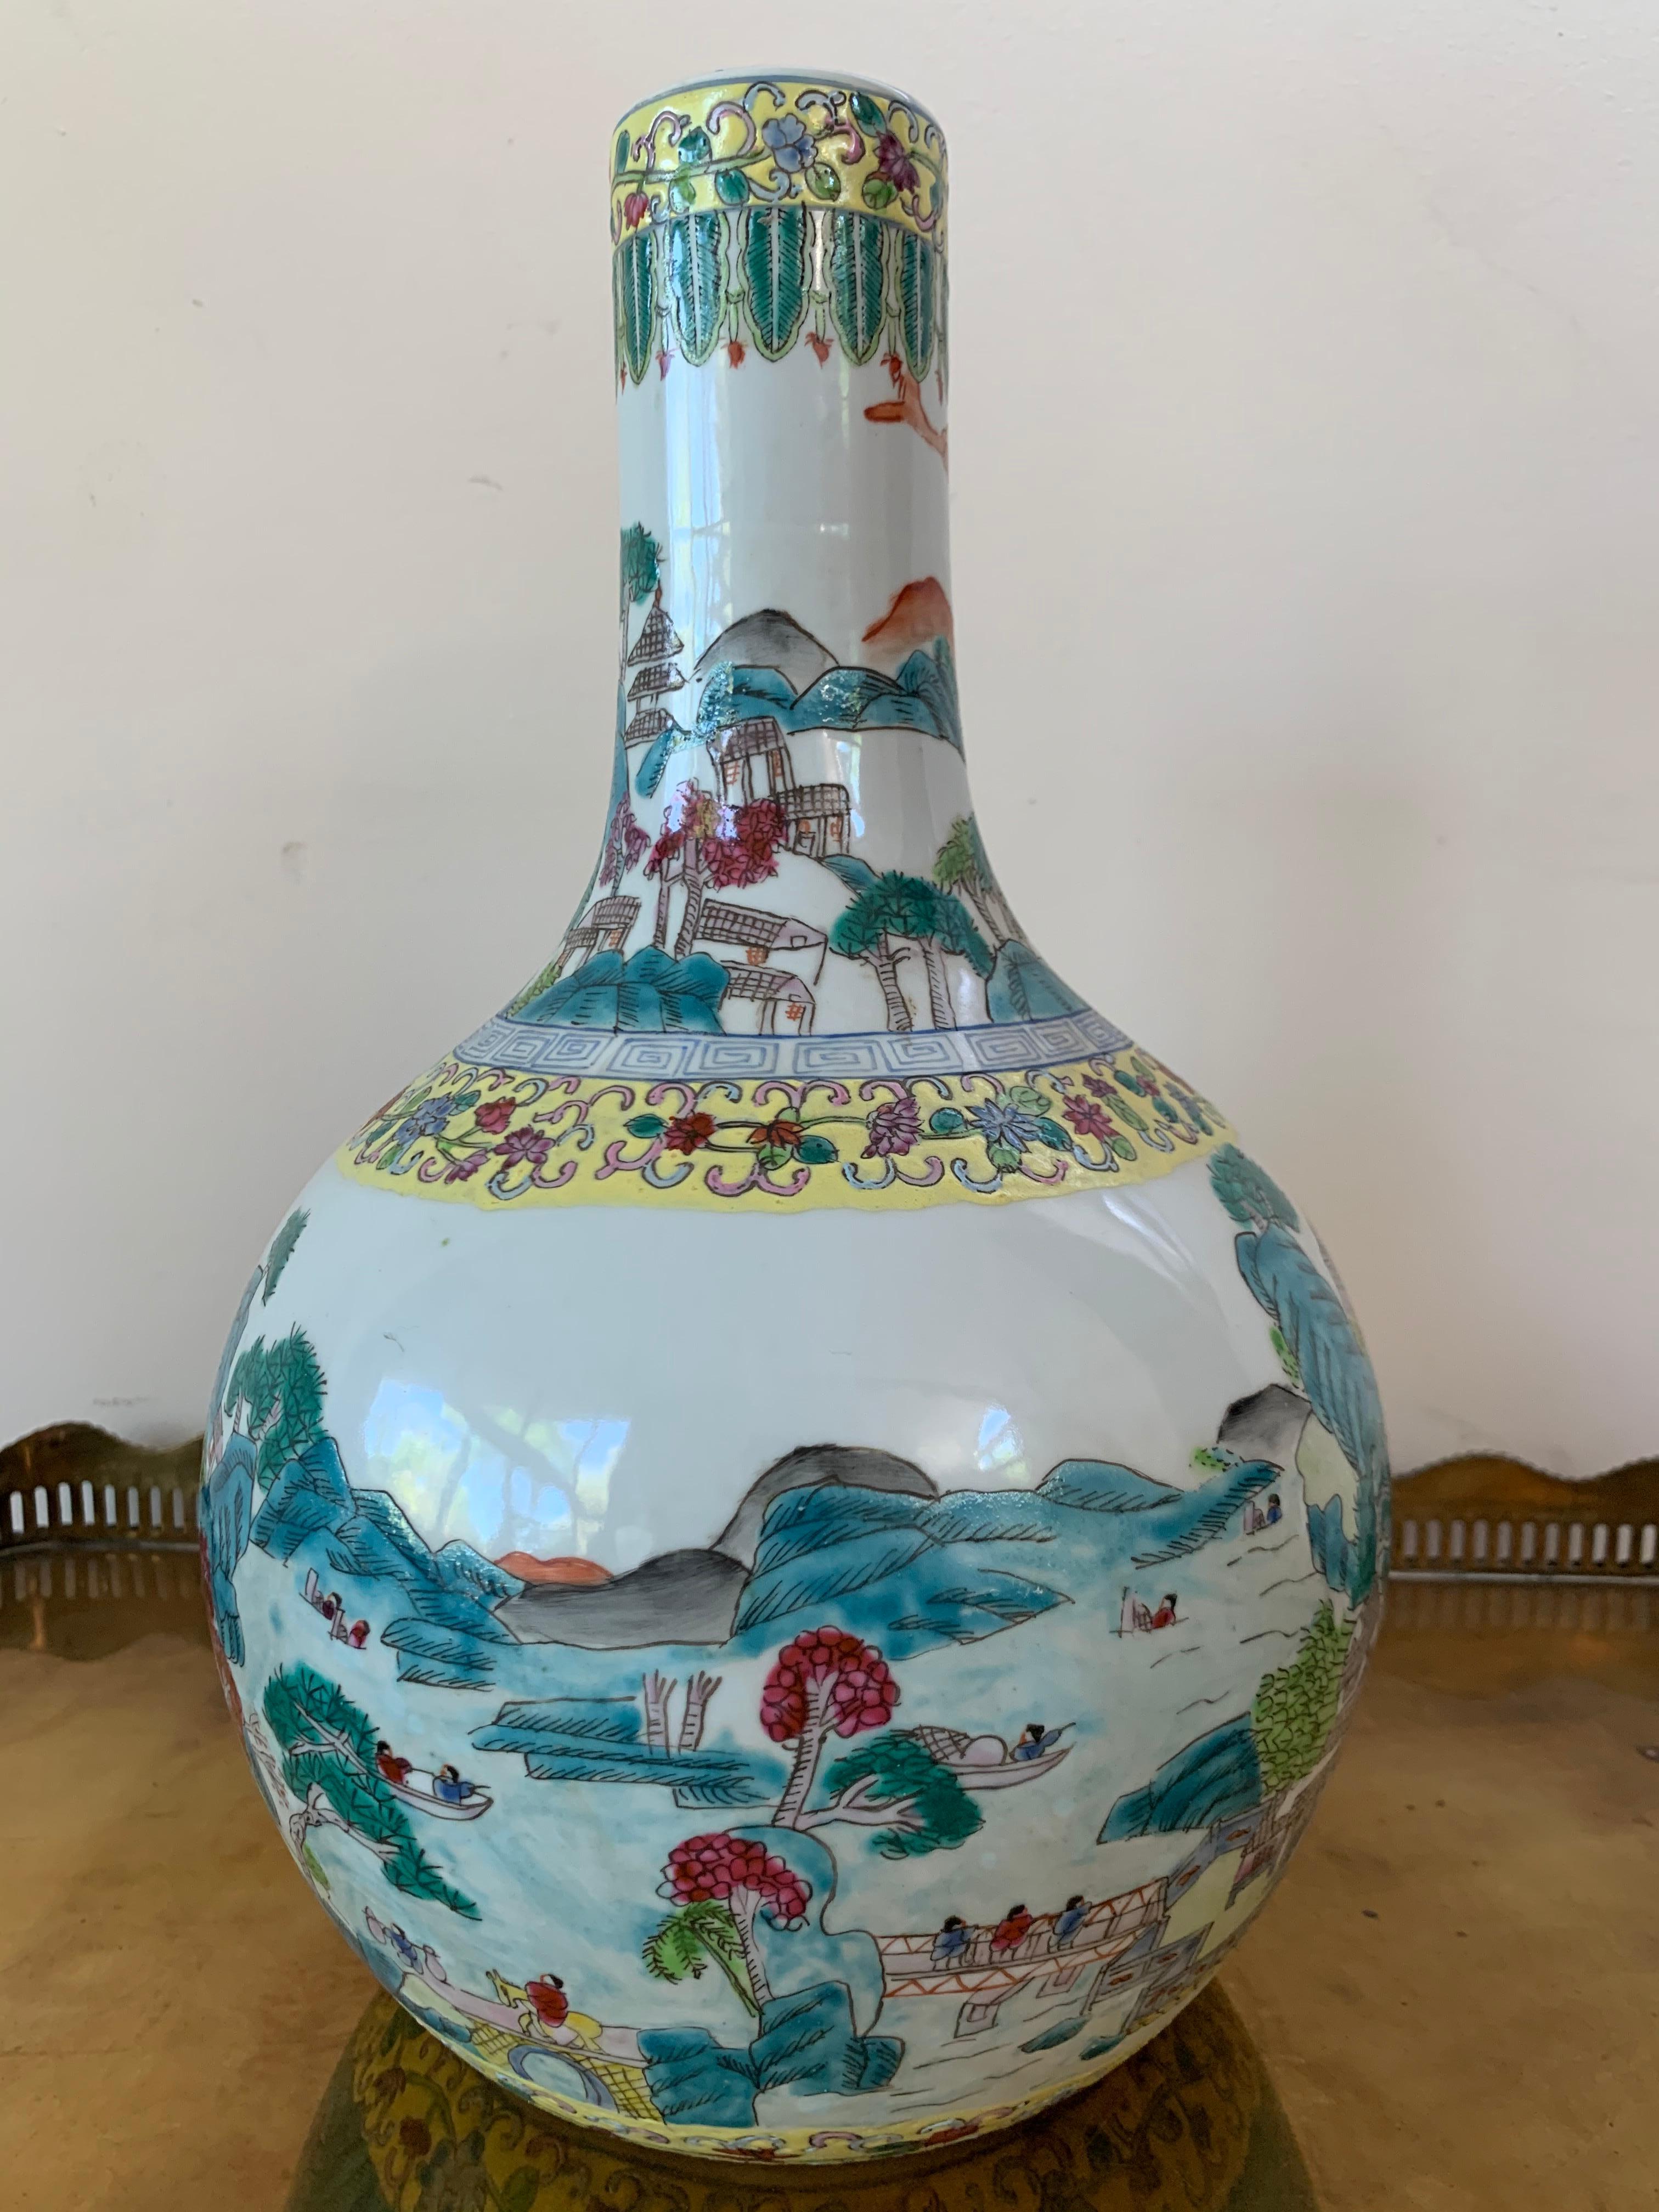 Ming Large Early 20th Century Tianqiuping or Globular Cloisonné Vase For Sale